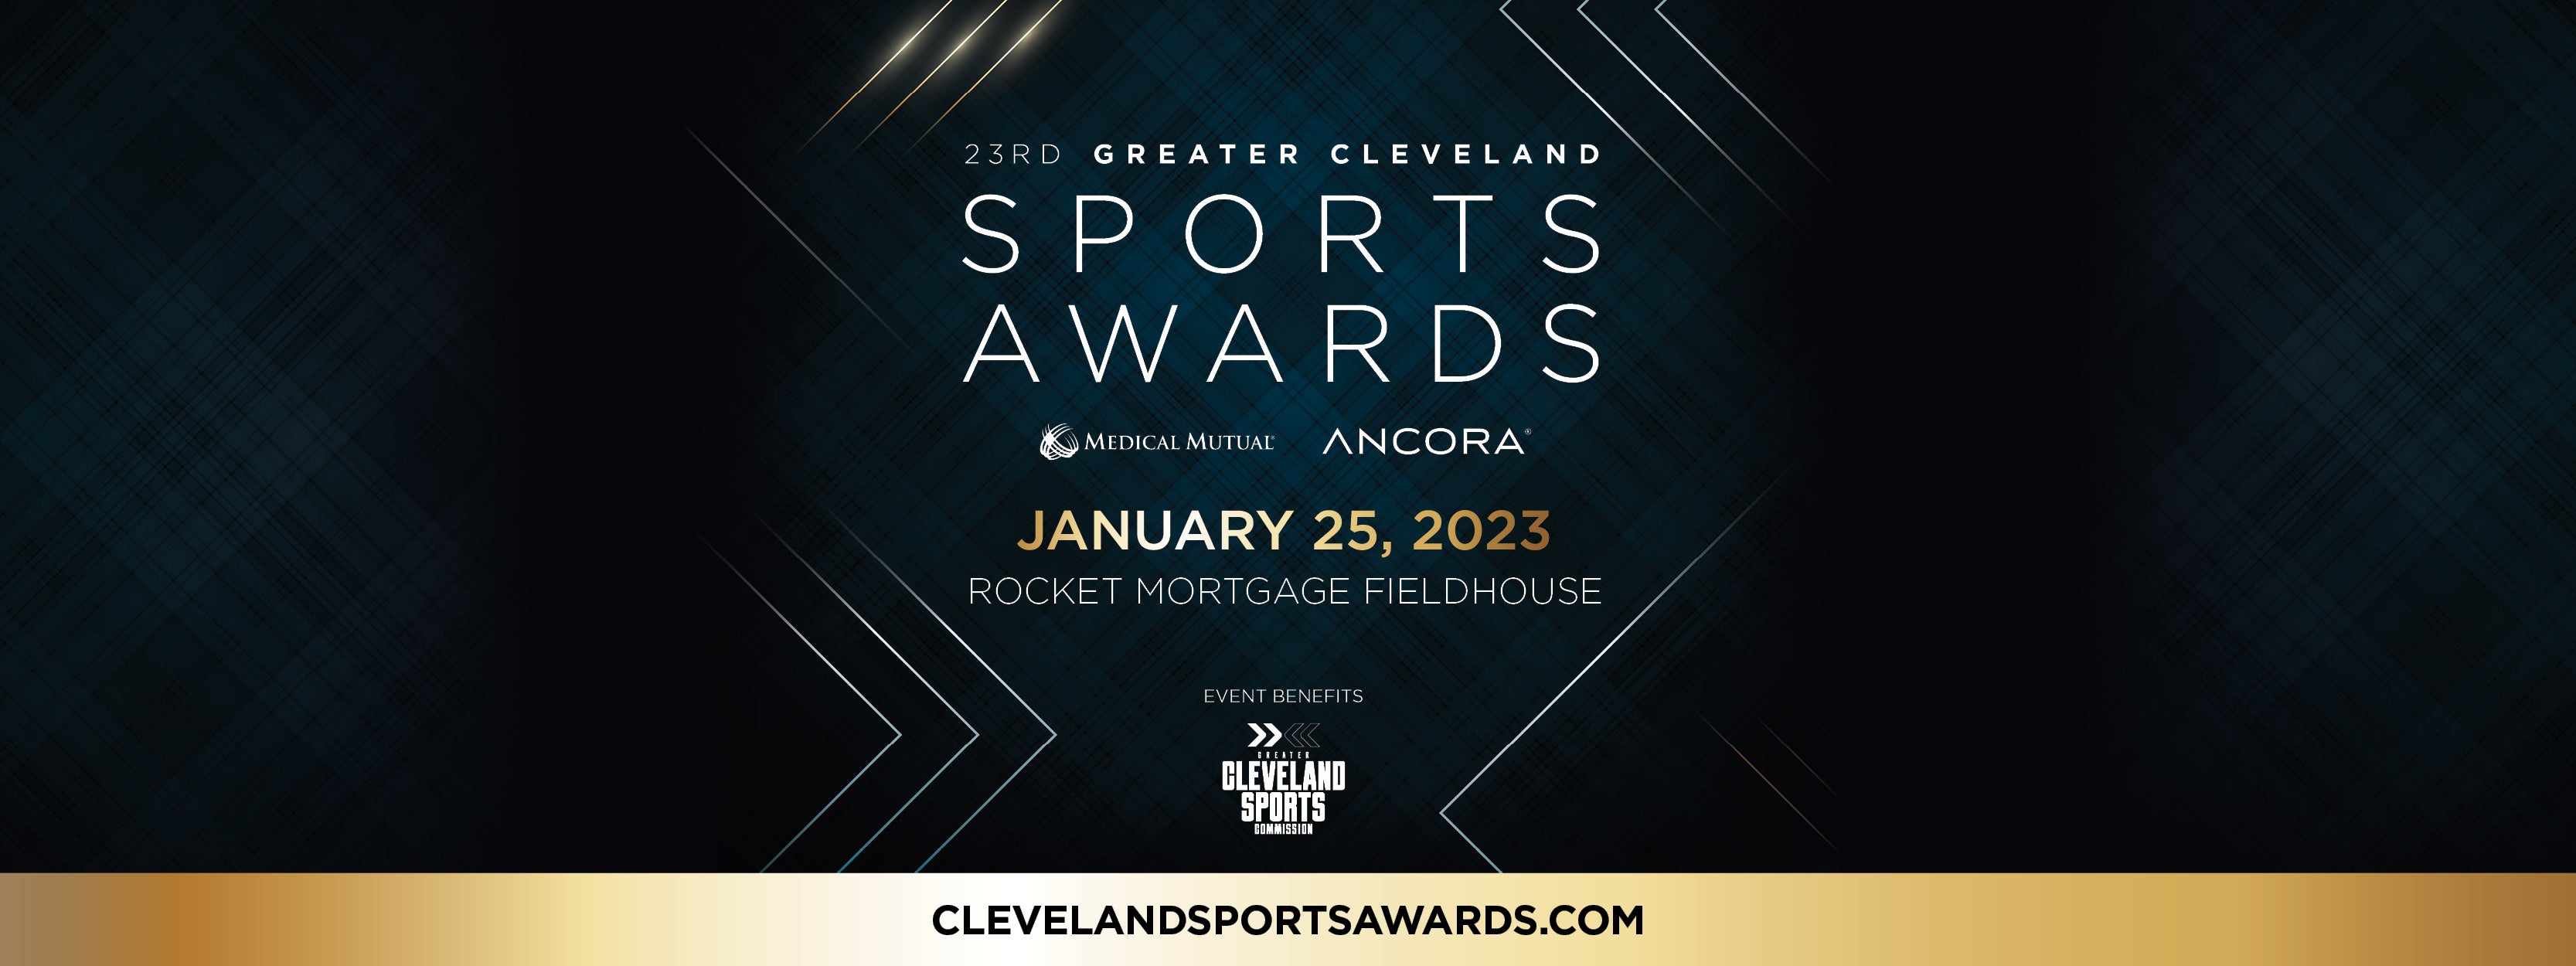 23rd Greater Cleveland Sports Awards presented by Medical Mutual and Ancora